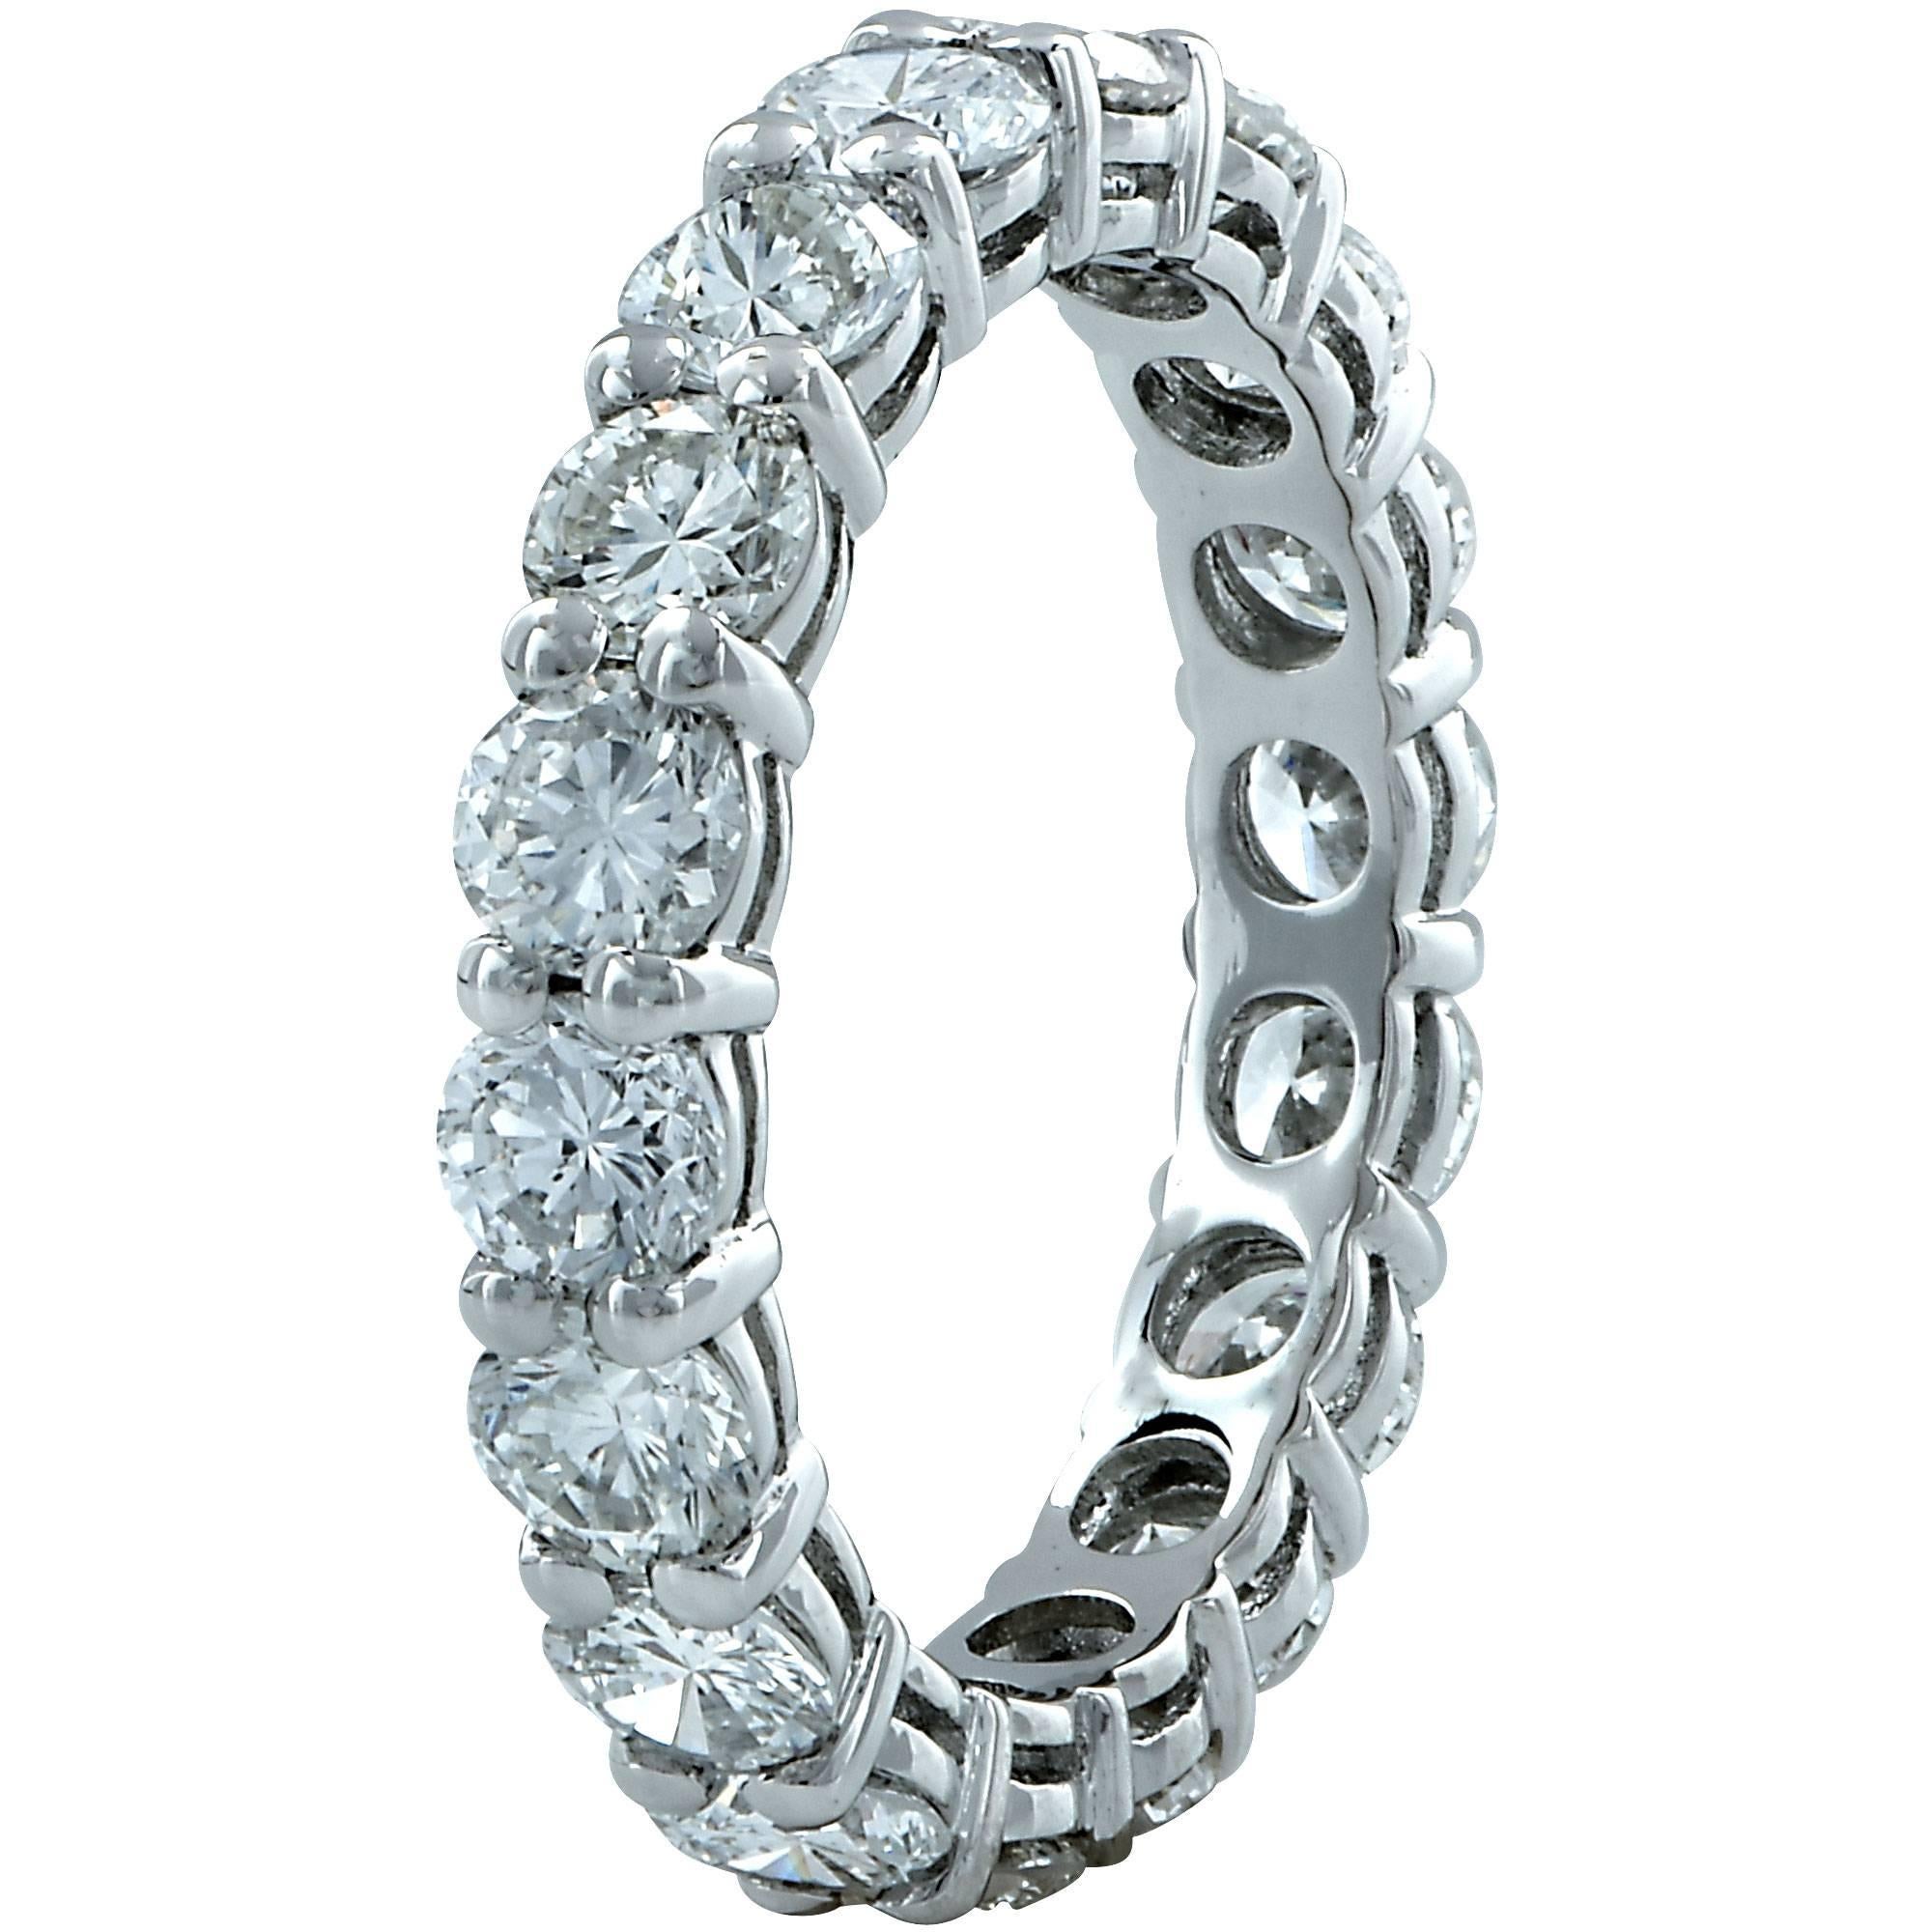 This beautiful platinum handmade eternity band size 6.25 features 18 round brilliant cut diamonds weighing 3.16cts total, H color SI clarity.

The ring is a size 6.25.
It is stamped and/or tested as platinum.
The metal weight is 4.21 grams.

This